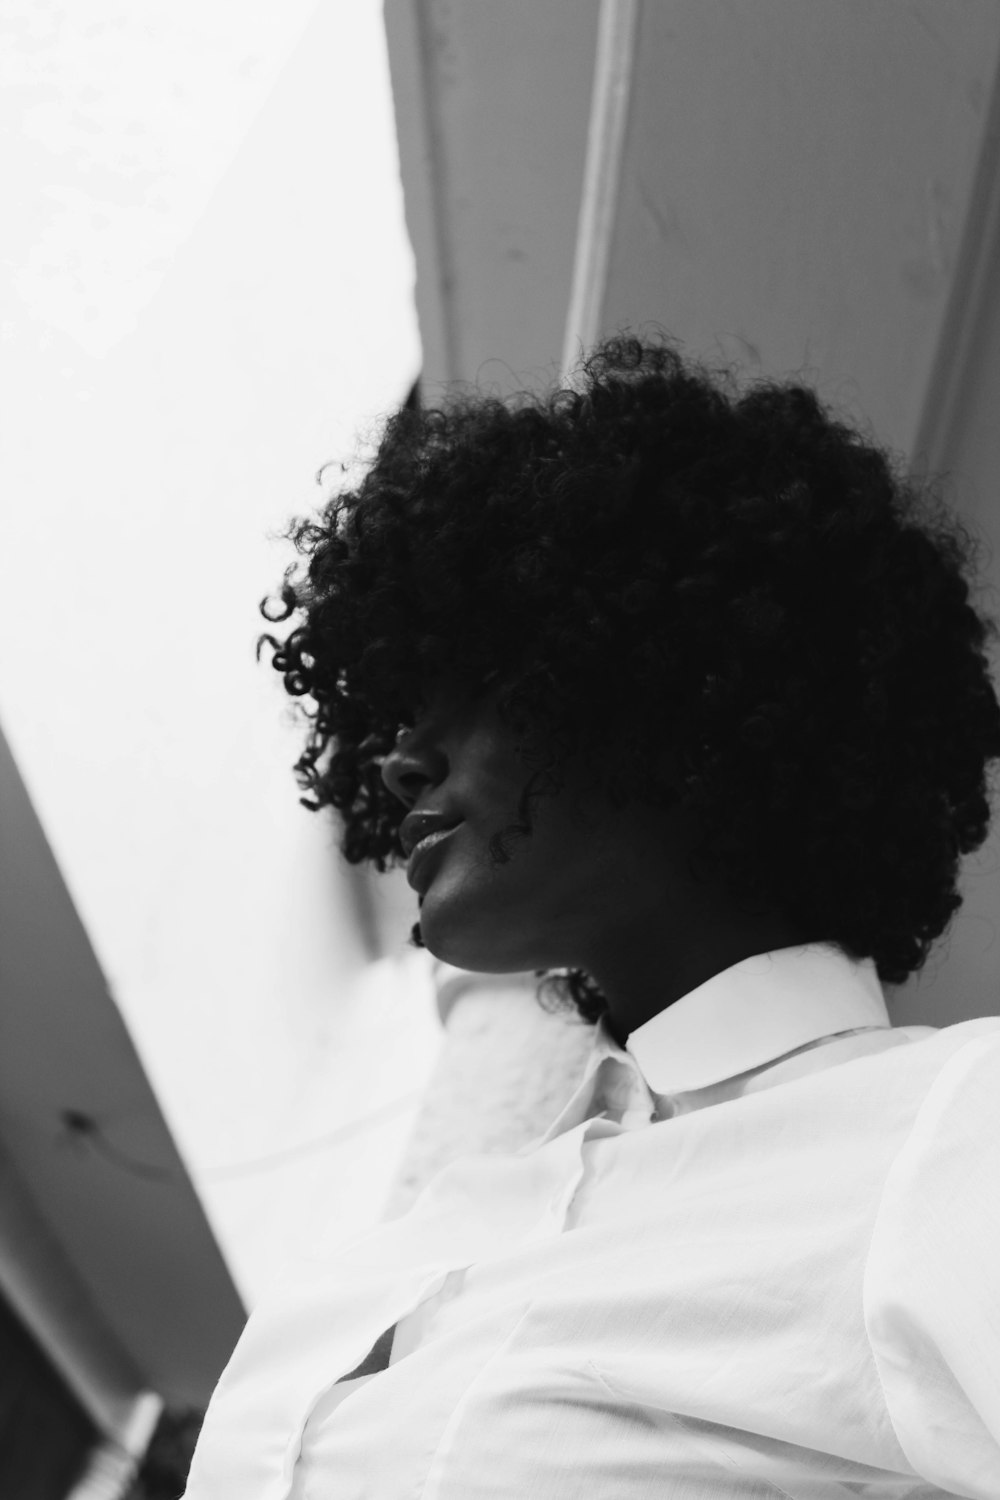 mannequin wearing white collared shirt